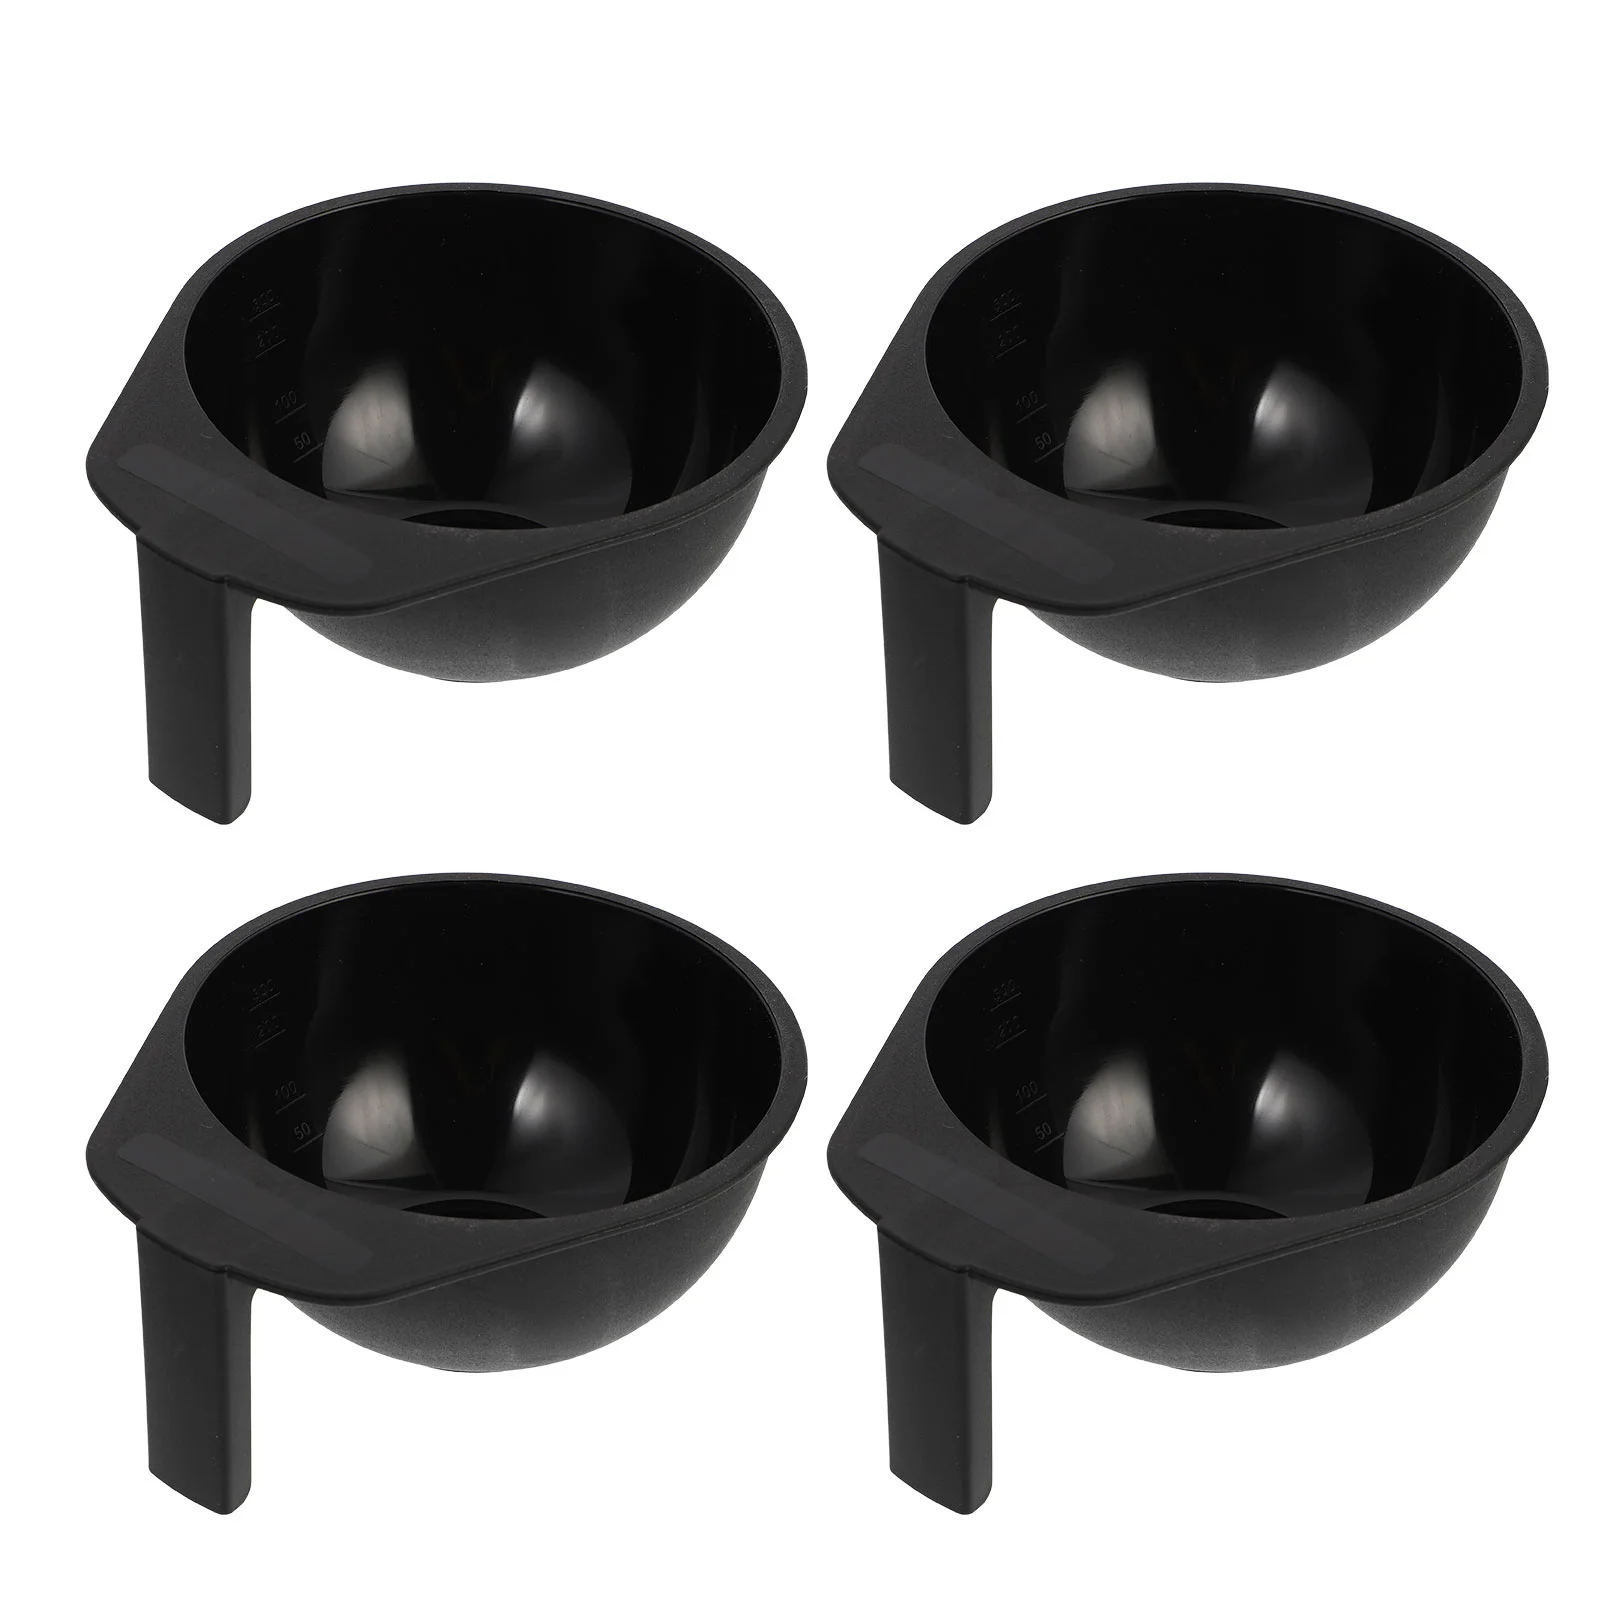 

Hair Color Bowl with Handle Hair Dye Mixing Bowls 4pcs Salon Hair Coloring Dyeing Tint Bowl for Home Barber Shop DIY Color Mixer